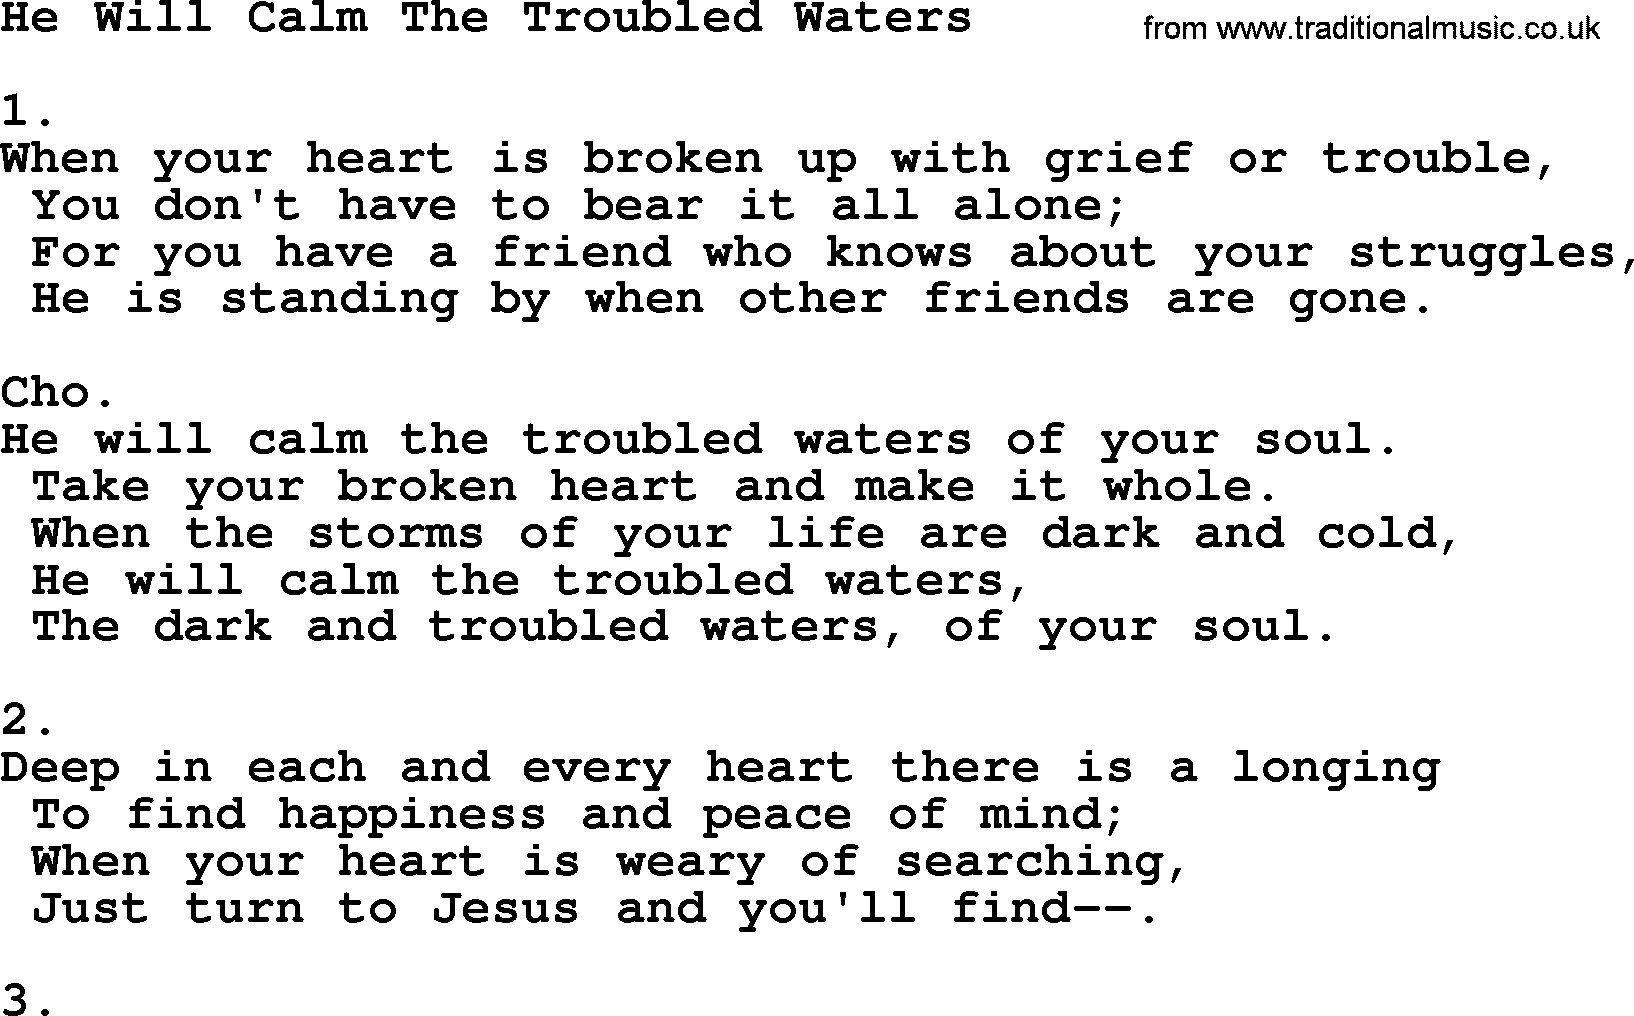 Apostolic & Pentecostal Hymns and Songs, Hymn: He Will Calm The Troubled Waters lyrics and PDF